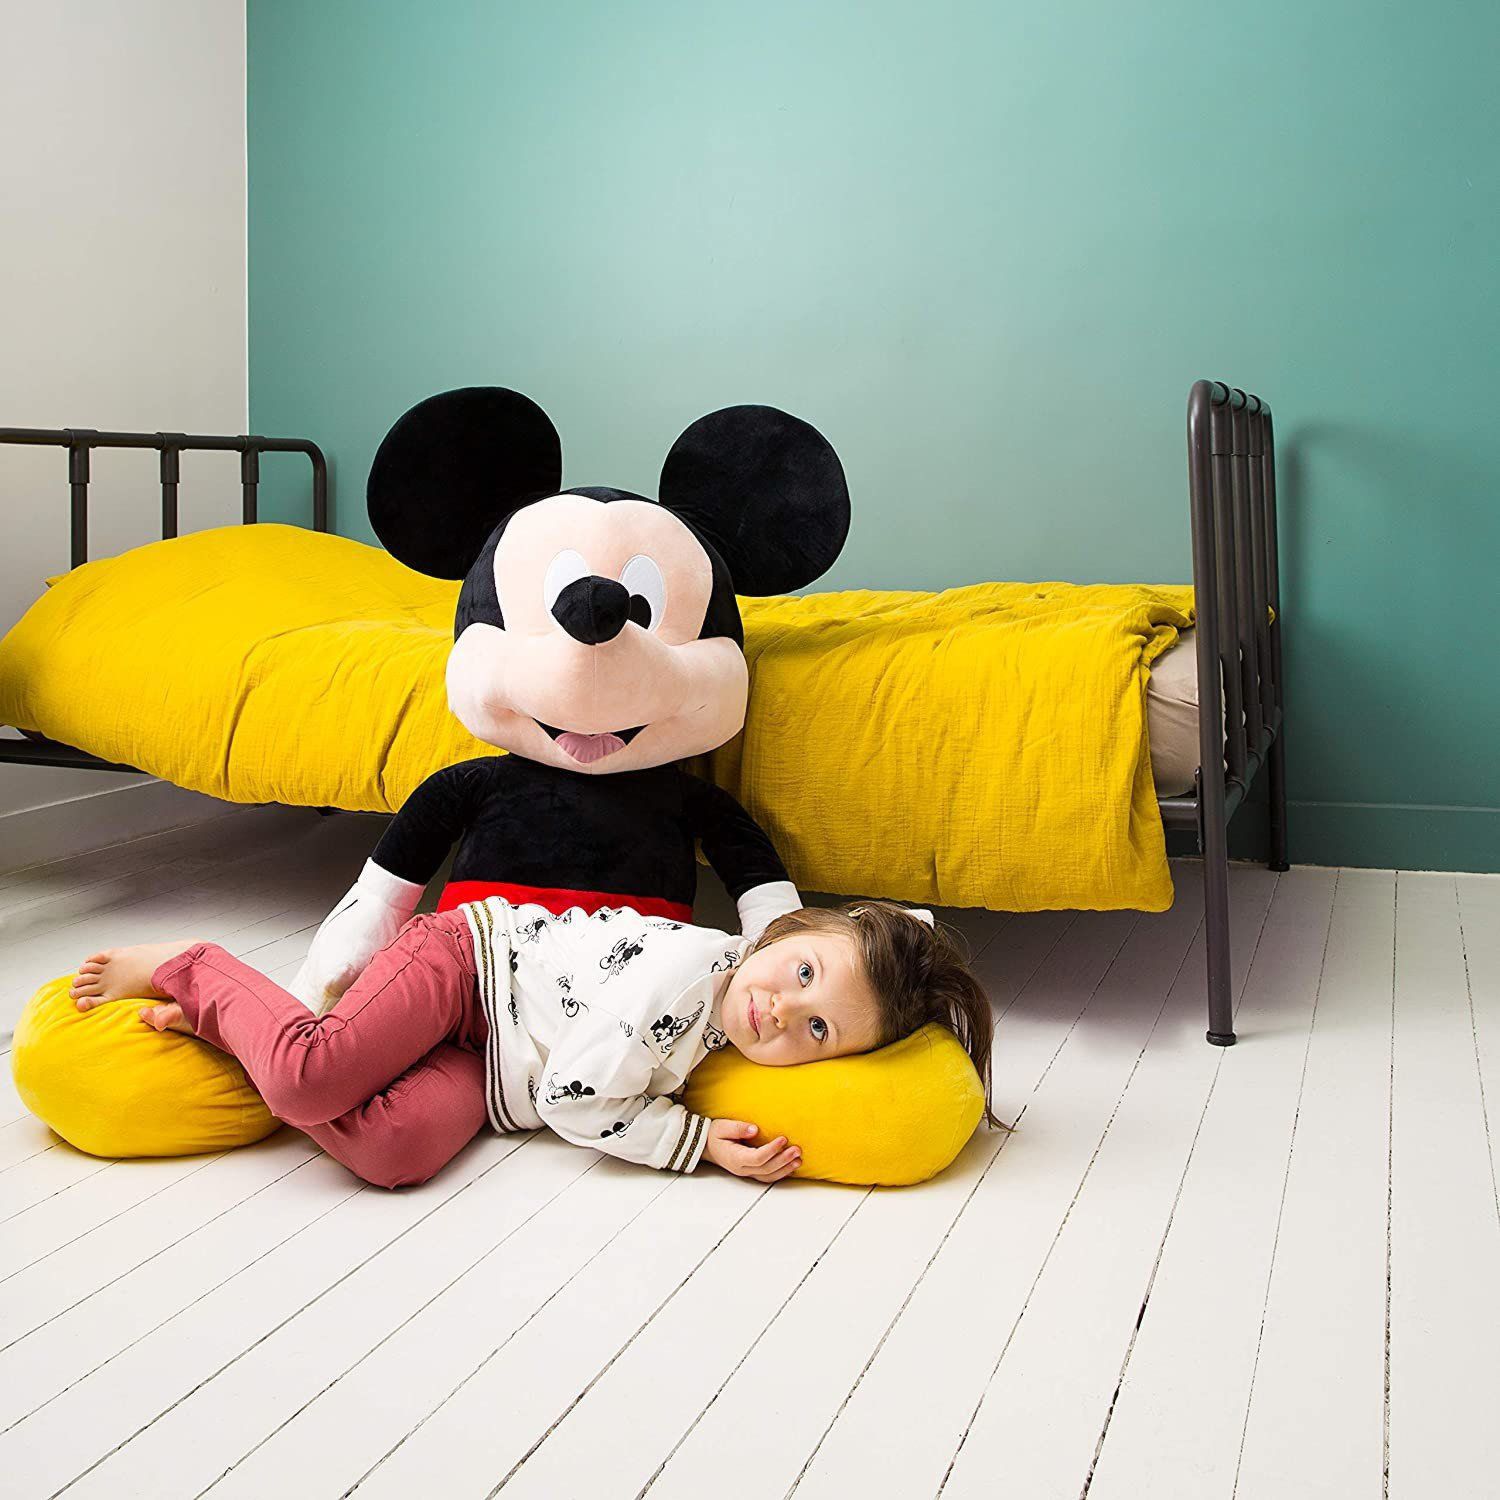 Peluche Mickey Mouse Gigante